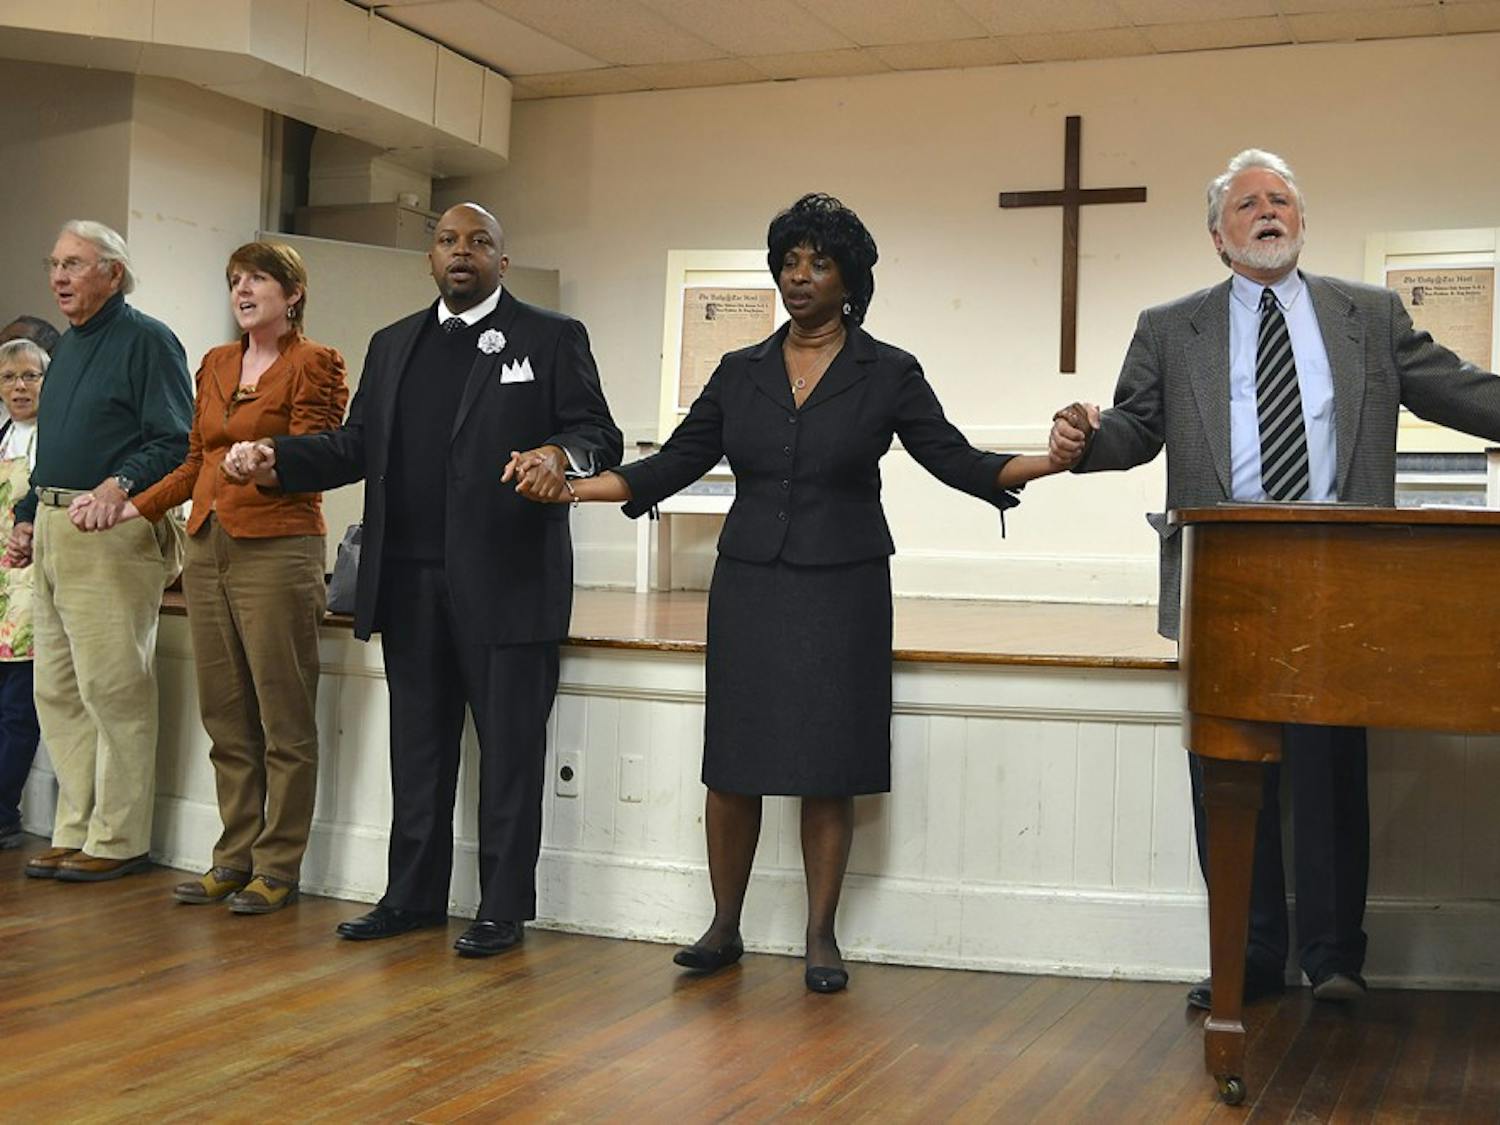 Community members gather in Chapel Hill’s University Baptist Church to honor Martin Luther King Jr., who gave a speech in the same room on May 8, 1960.